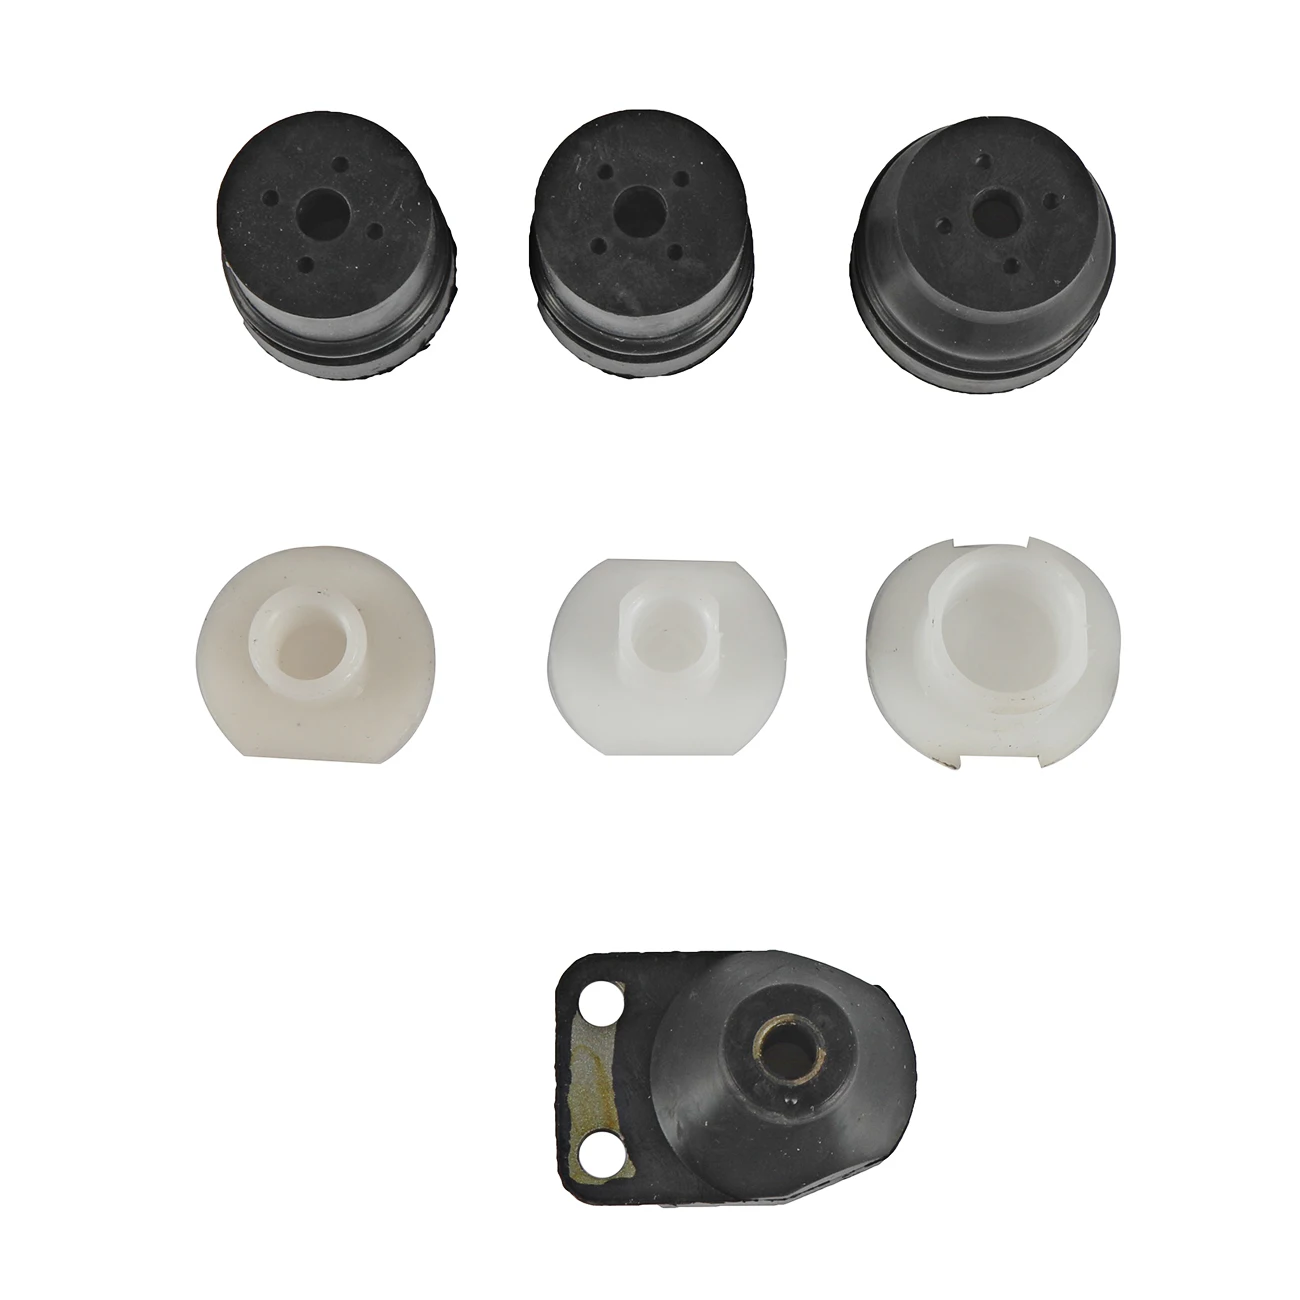 Annular Buffer Rubber Mount Set Fits STIHL 038 MS380 MS381 Chainsaw. 